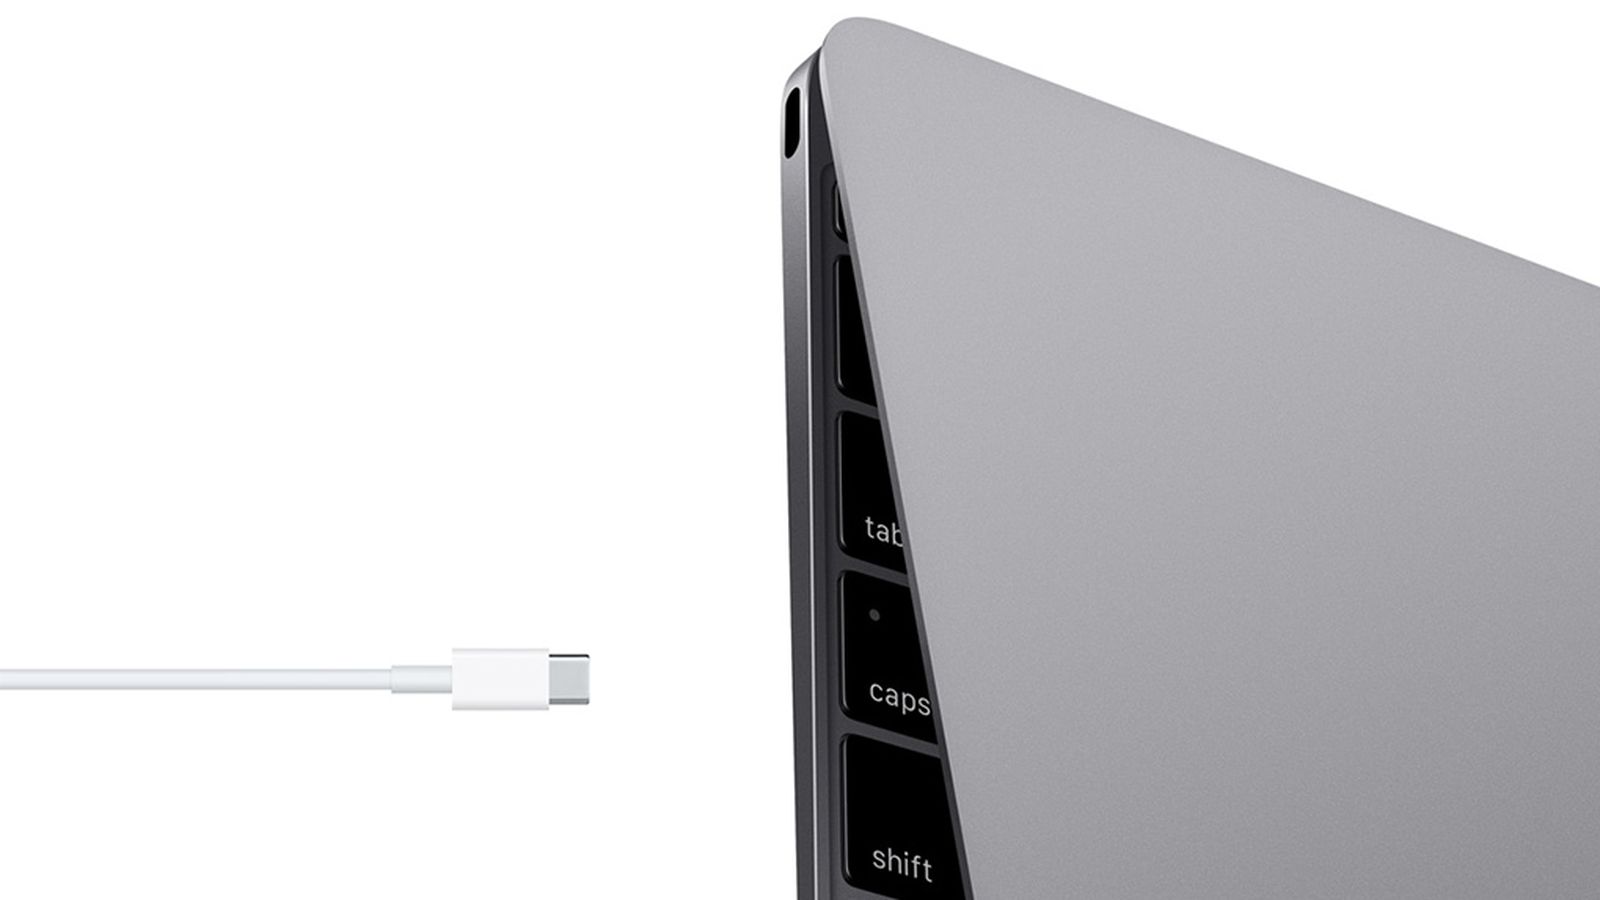 Do You Need Usb 3.1 For Mac Charging